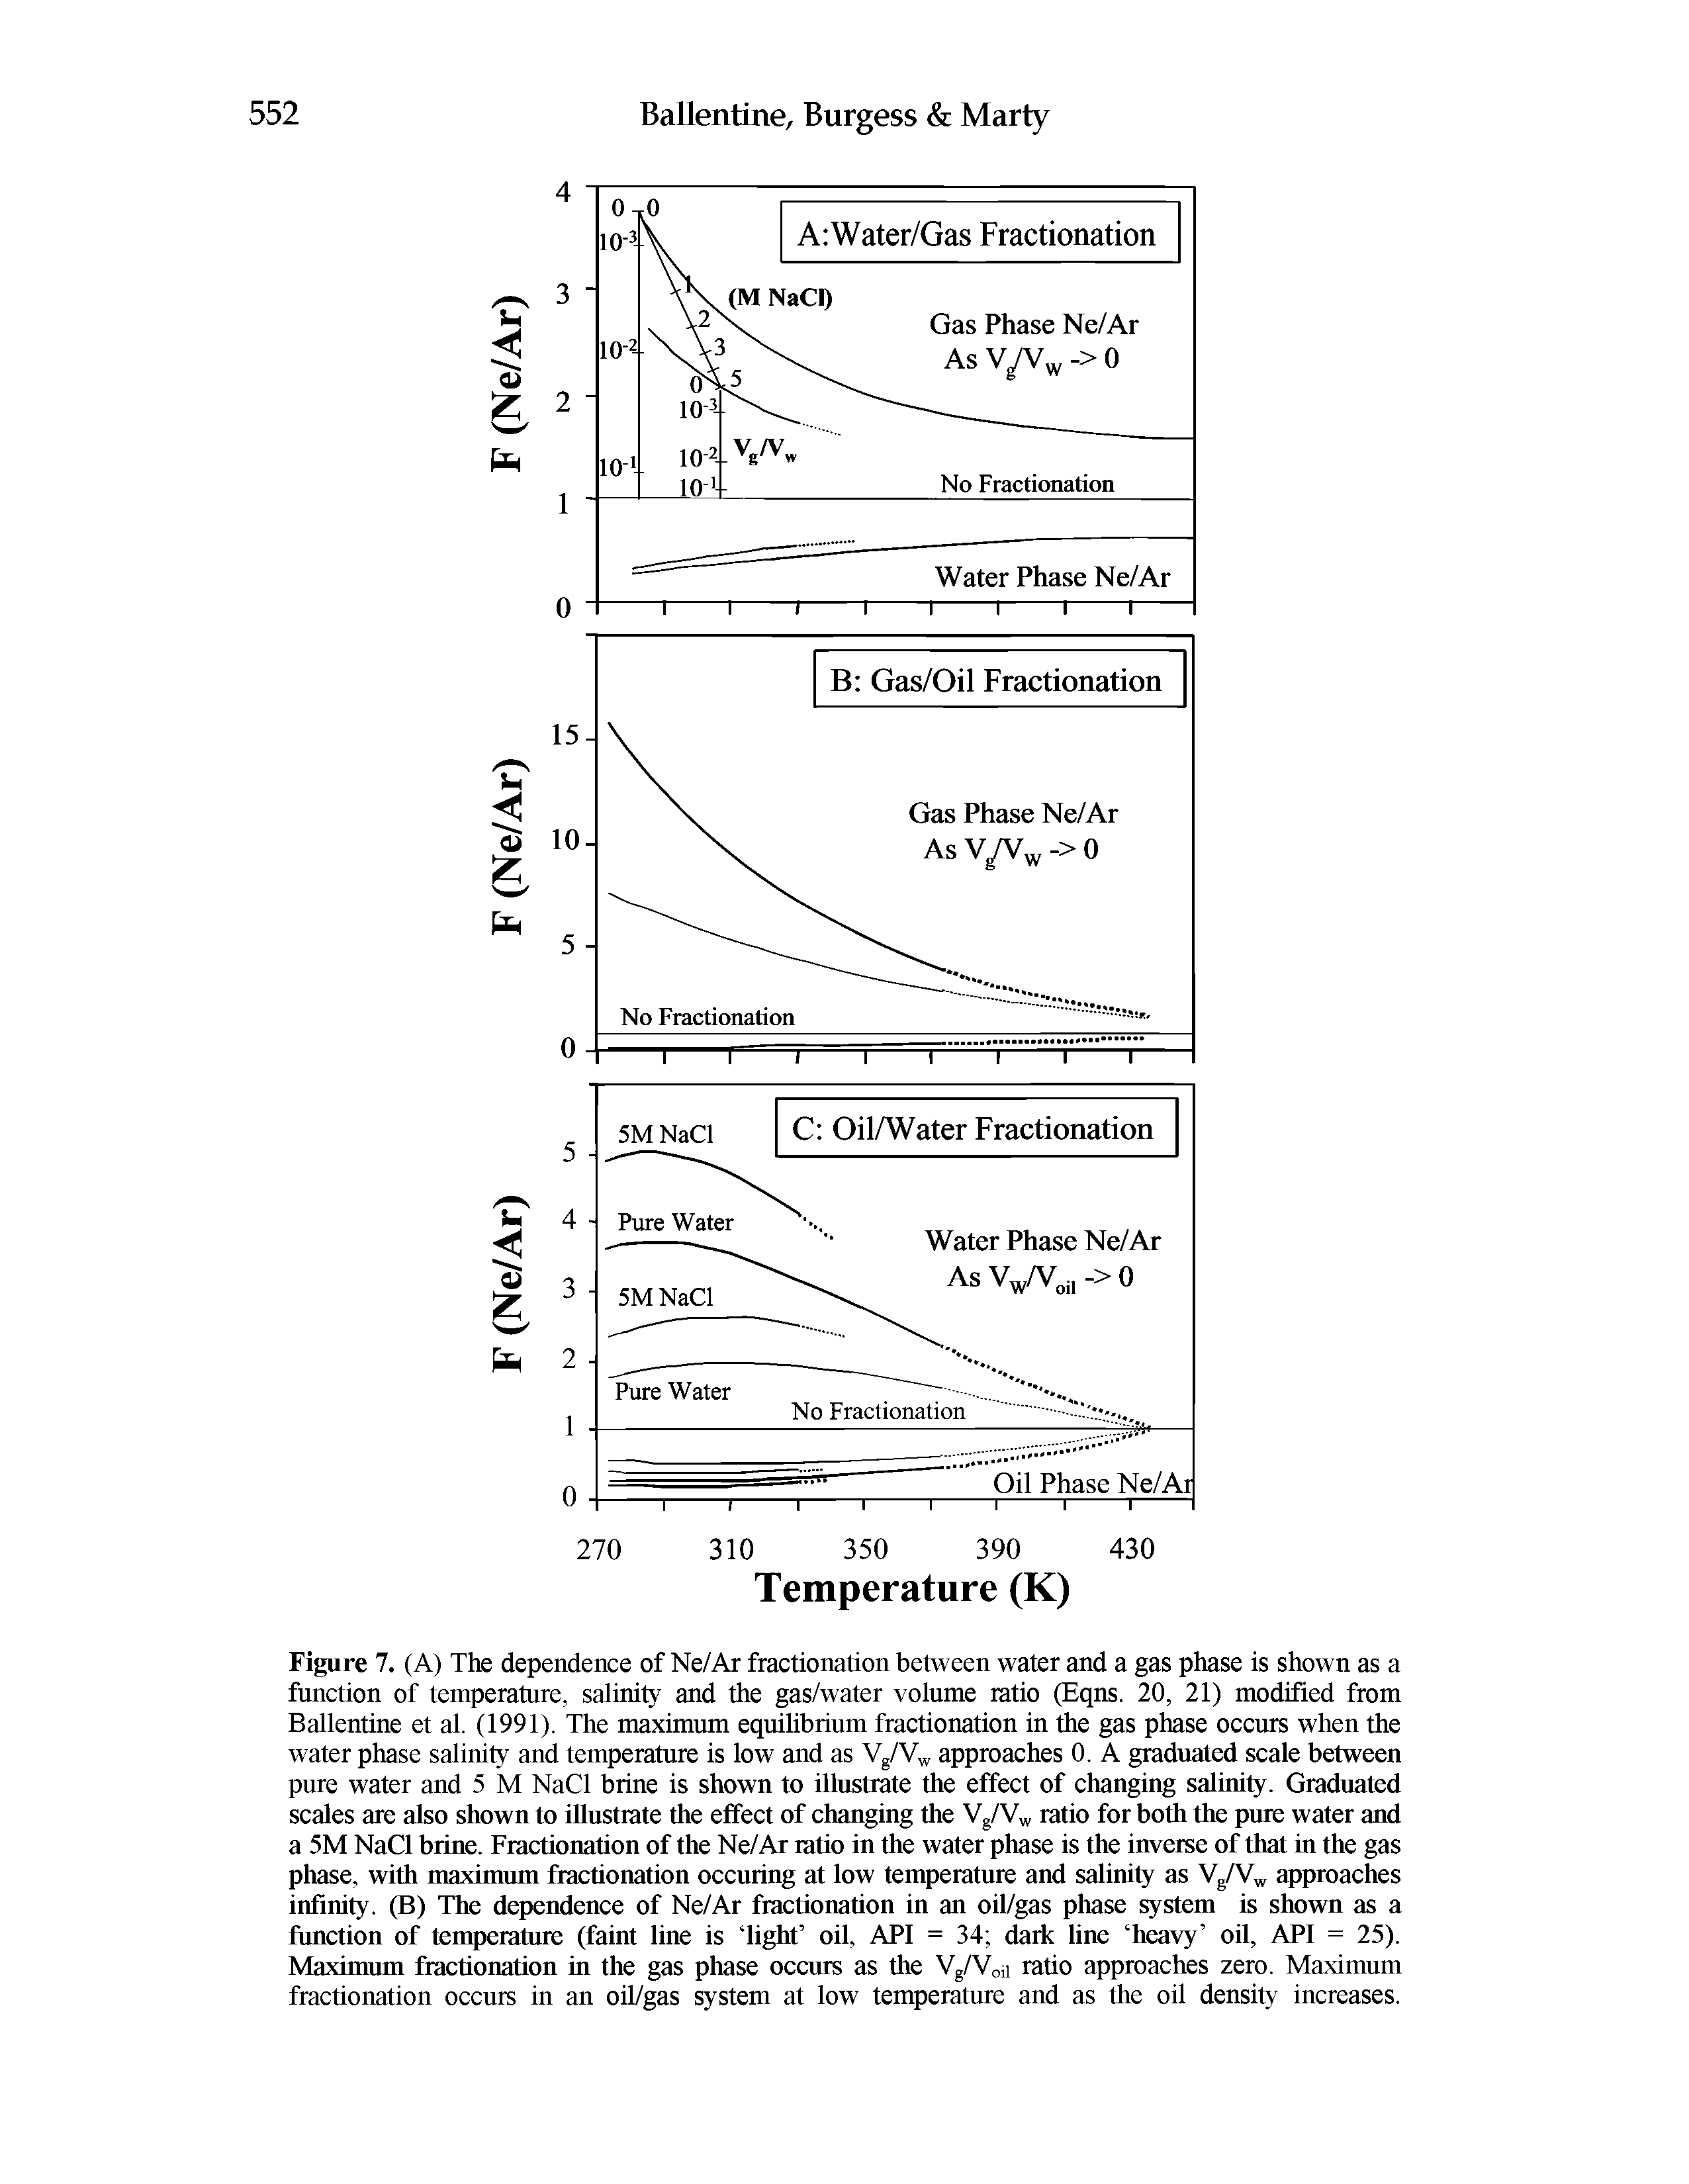 Figure 7. (A) The dependence of Ne/Ar fractionation between water and a gas phase is shown as a function of temperature, salinity and the gas/water volume ratio (Eqns. 20, 21) modified from Ballentine et al. (1991). The maximum equilibrium fractionation in the gas phase occurs when the water phase salinity and temperature is low and as Vg/Vw approaches 0. A graduated scale between pure water and 5 M NaCl brine is shown to illustrate the effect of changing salinity. Graduated scales are also shown to illustrate the effect of changing the Vg/Vw ratio for both the pure water and a 5M NaCl brine. Fractionation of the Ne/Ar ratio in the water phase is the inverse of that in the gas phase, with maximum fractionation occuring at low temperature and salinity as Vg/Vw approaches infinity. (B) The dependence of Ne/Ar fractionation in an oil/gas phase system is shown as a function of temperature (faint line is Tight oil, API = 34 dark line heavy oil, API = 25). Maximum fractionation in the gas phase occurs as the Vg/Vou ratio approaches zero. Maximum fractionation occurs in an oil/gas system at low temperature and as the oil density increases.